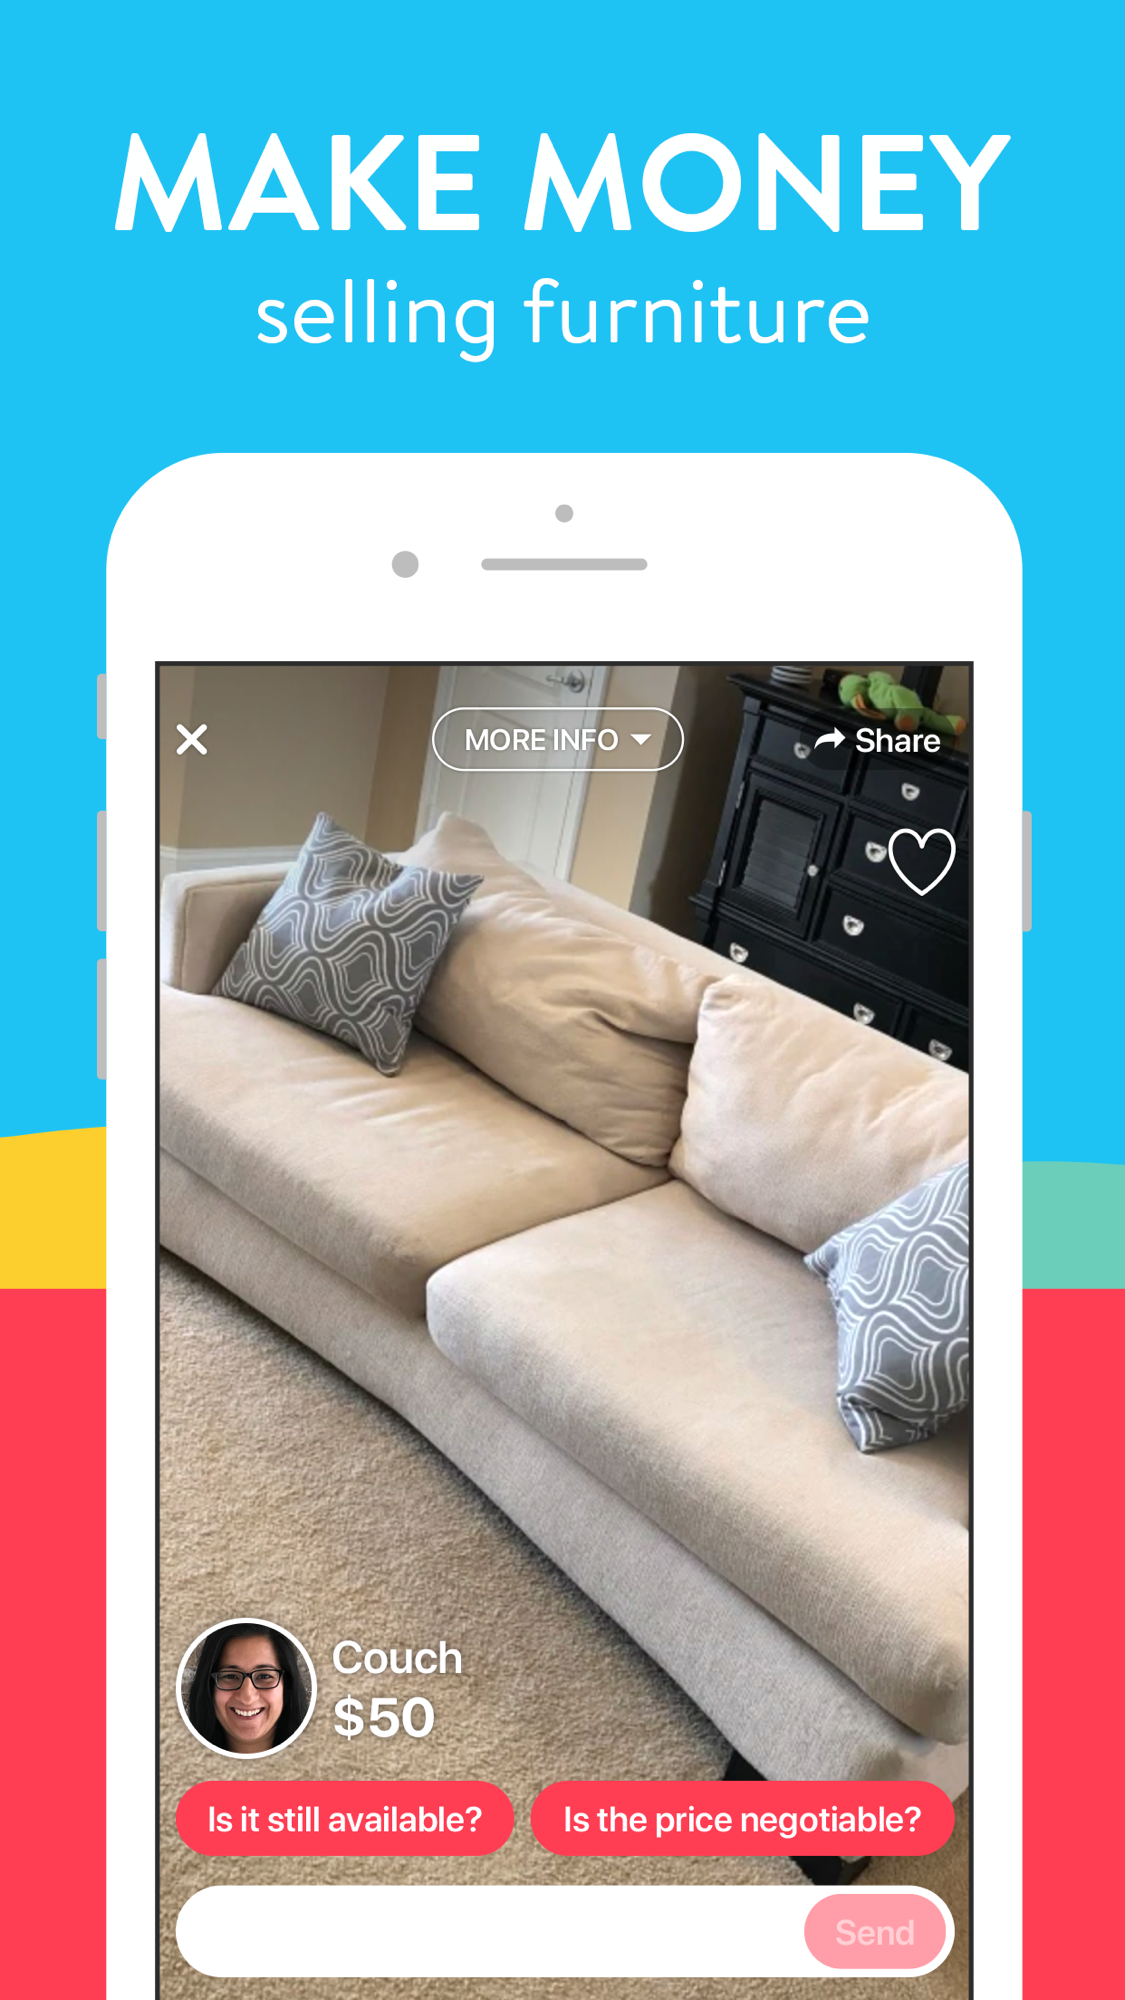 letgo: Sell & Buy Used Stuff  Featured Image for Version 